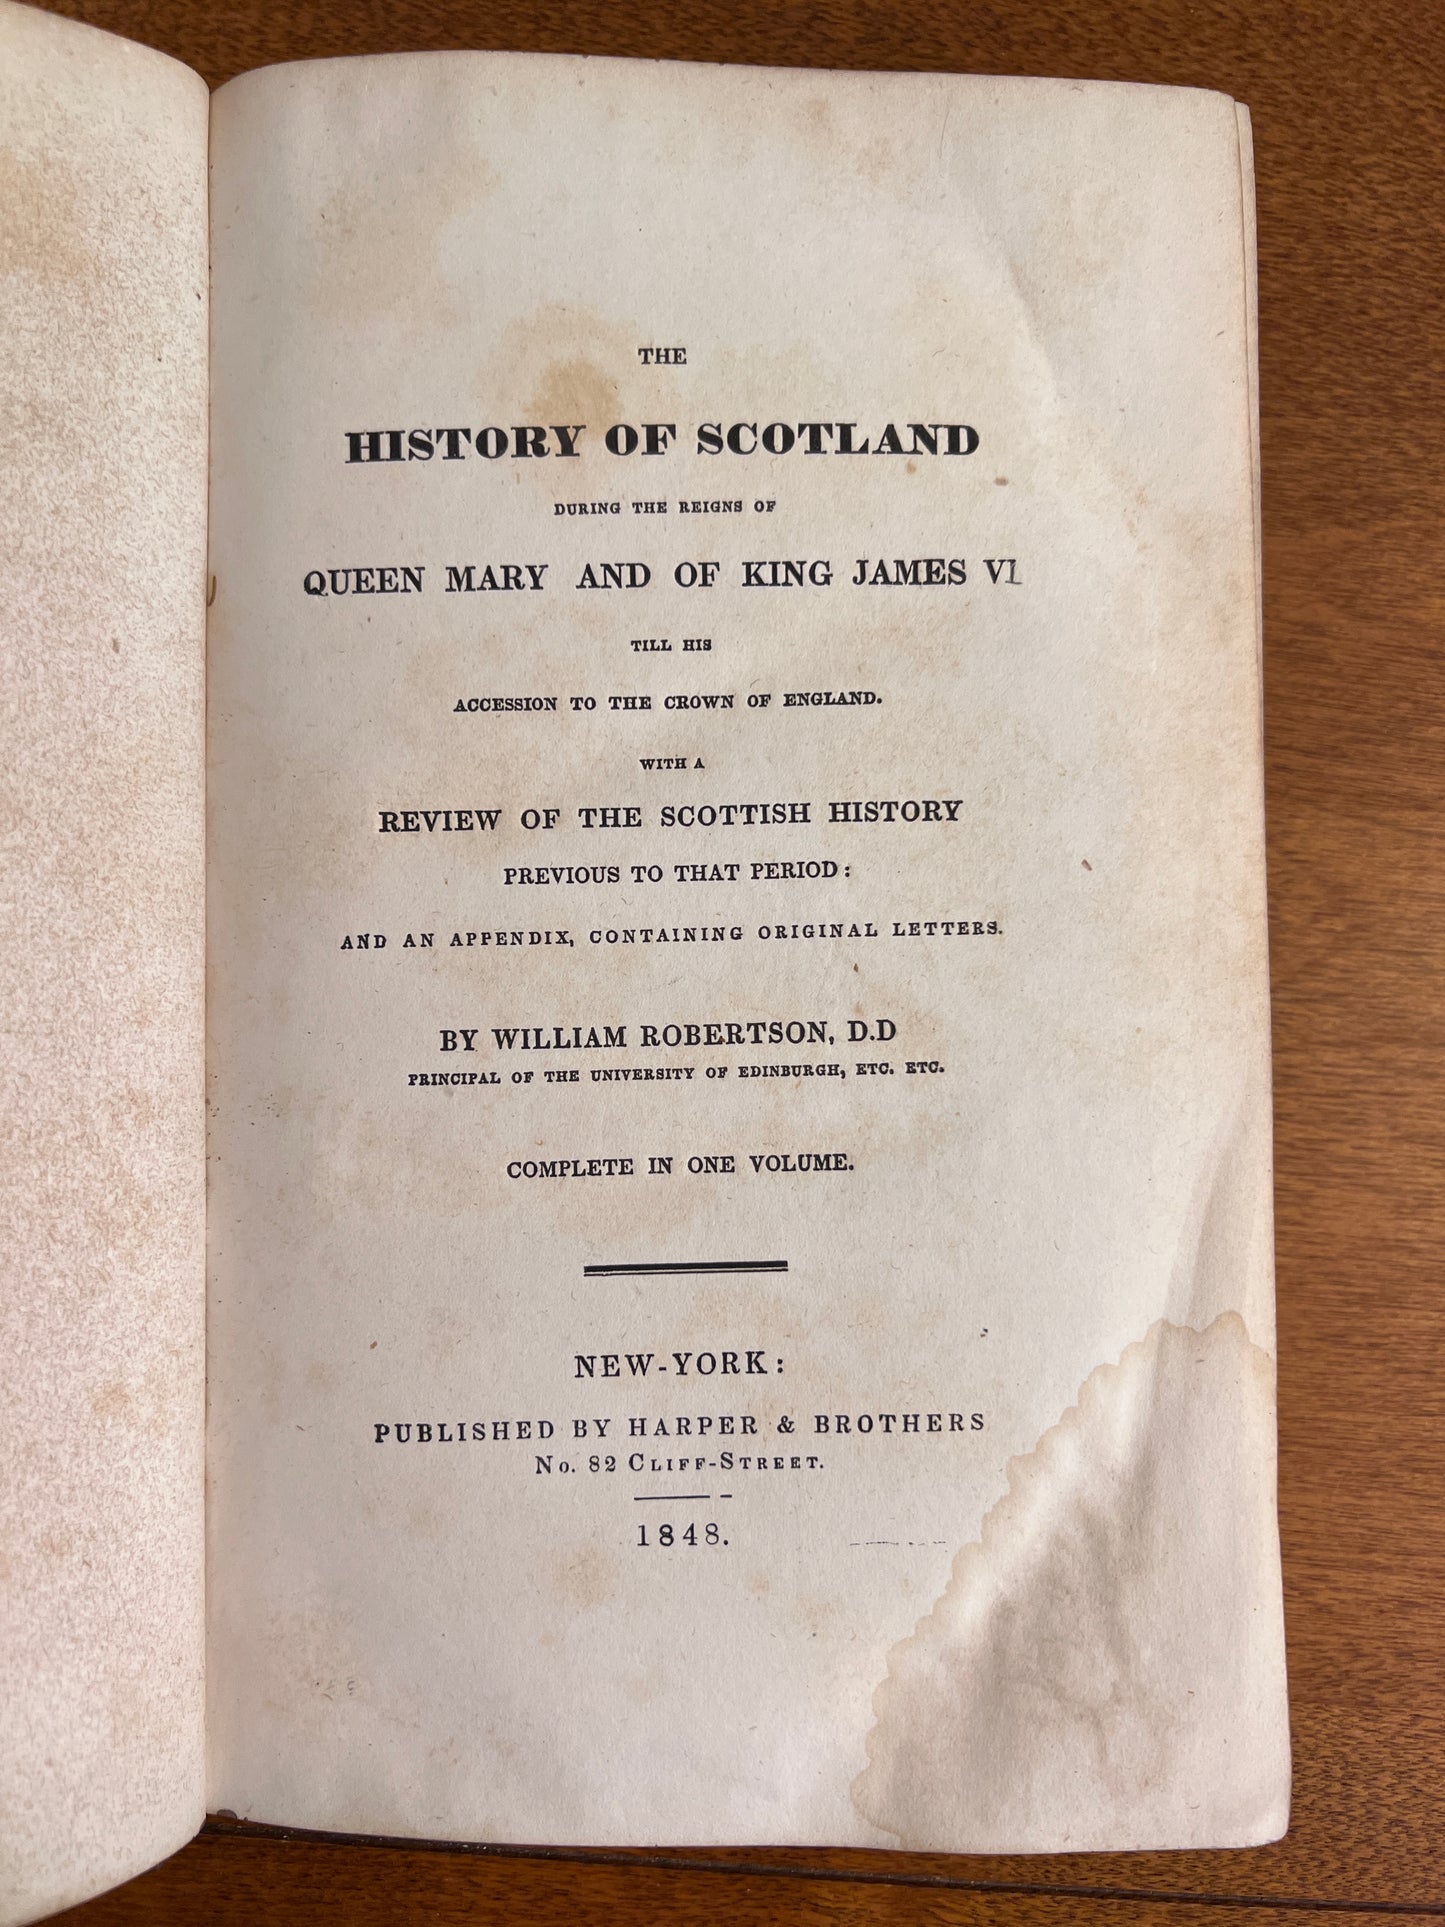 The History of Scotland During the Reigns of Queen Mary & King James VI by William Robertson Complete in One Vol. 1848